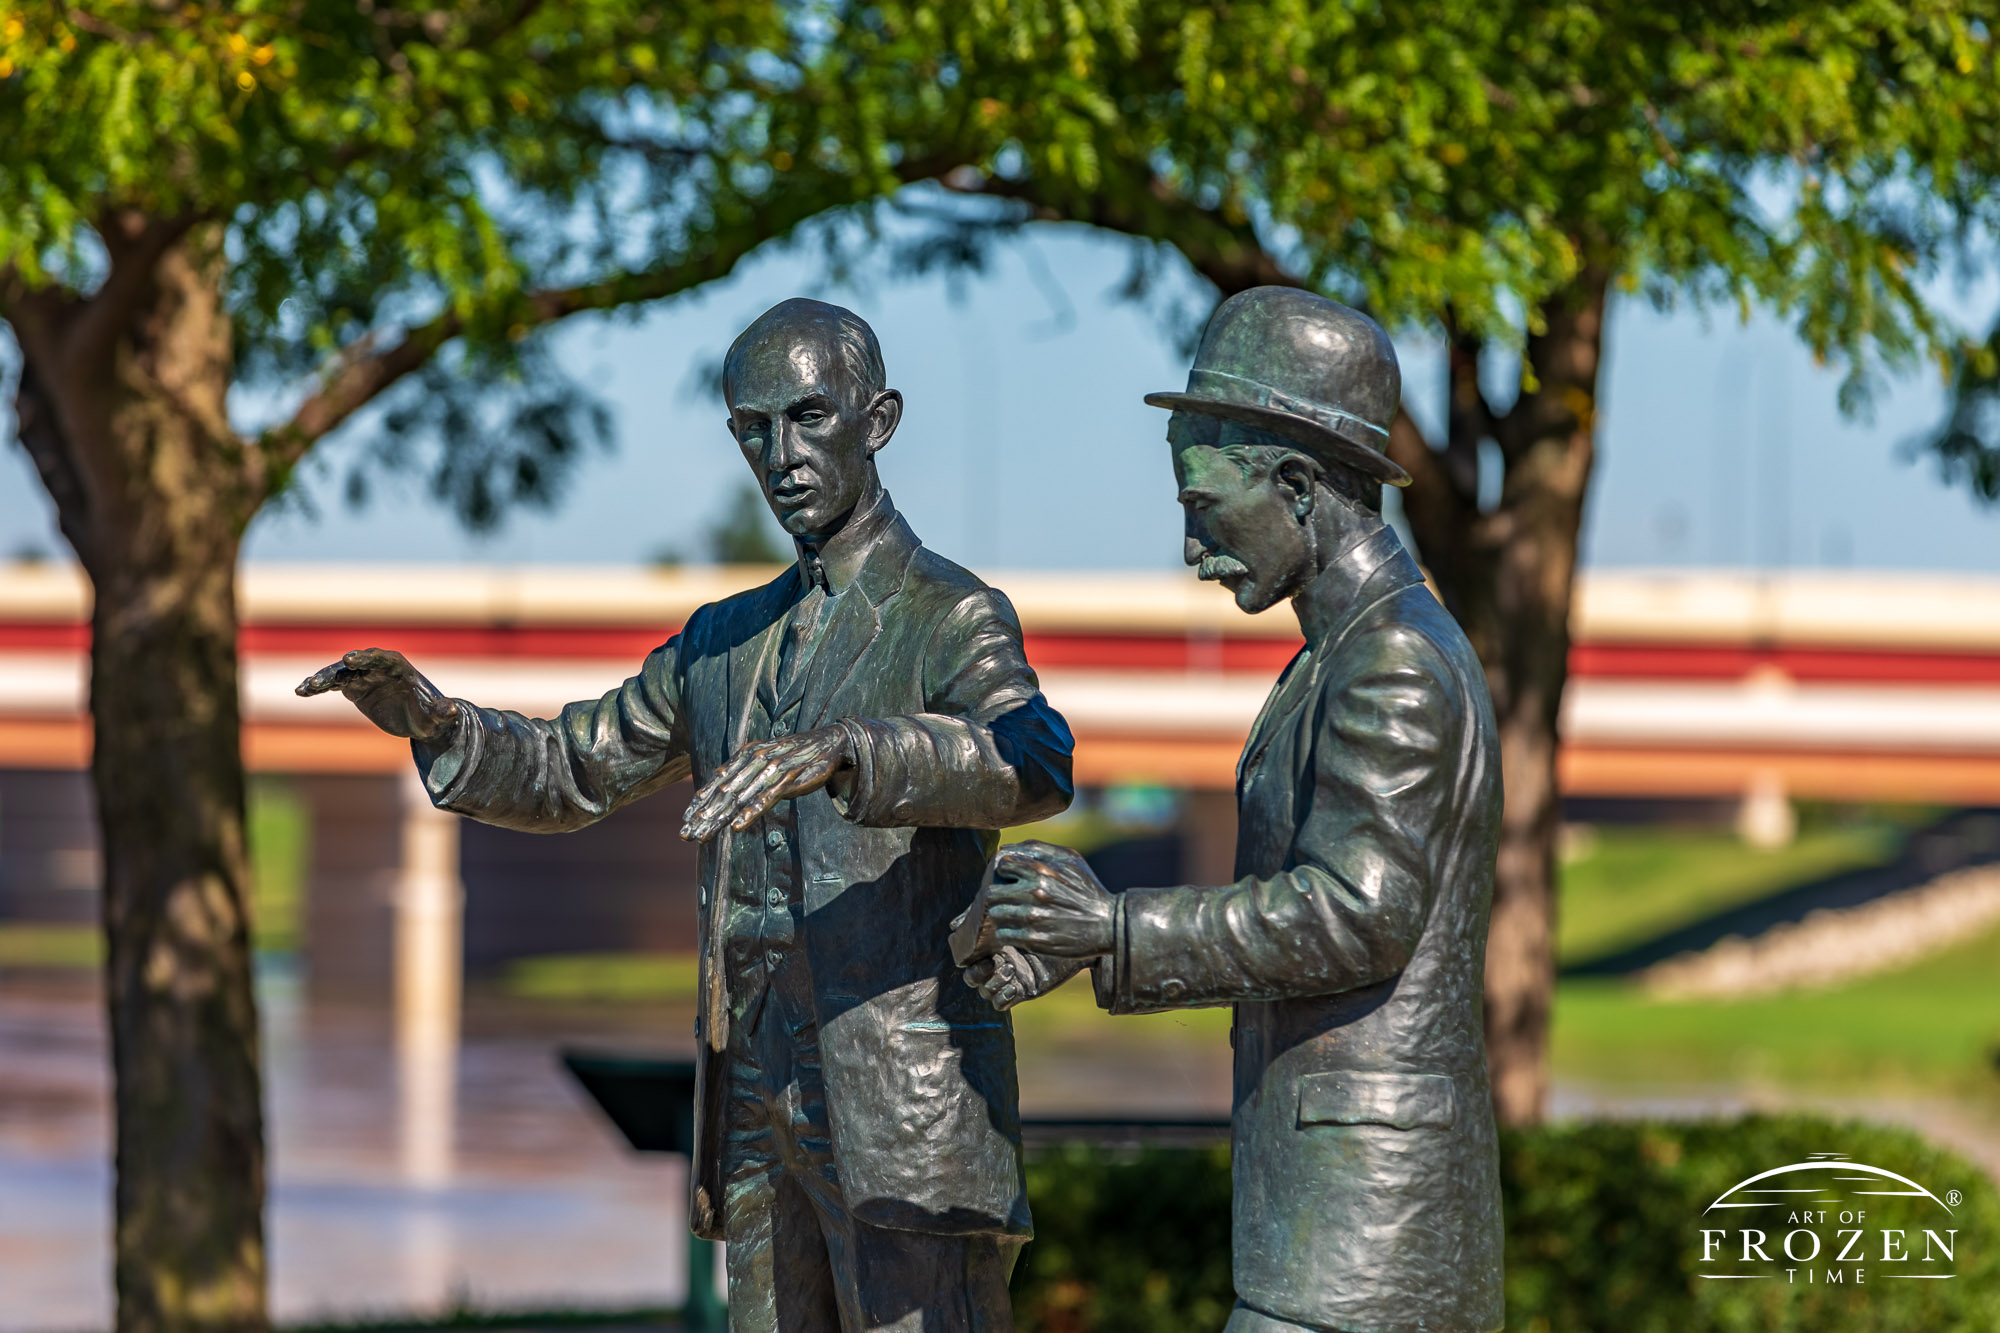 Life-size sculpture of the Wright Brothers depicts them in conversation in front of the Dayton Fountains